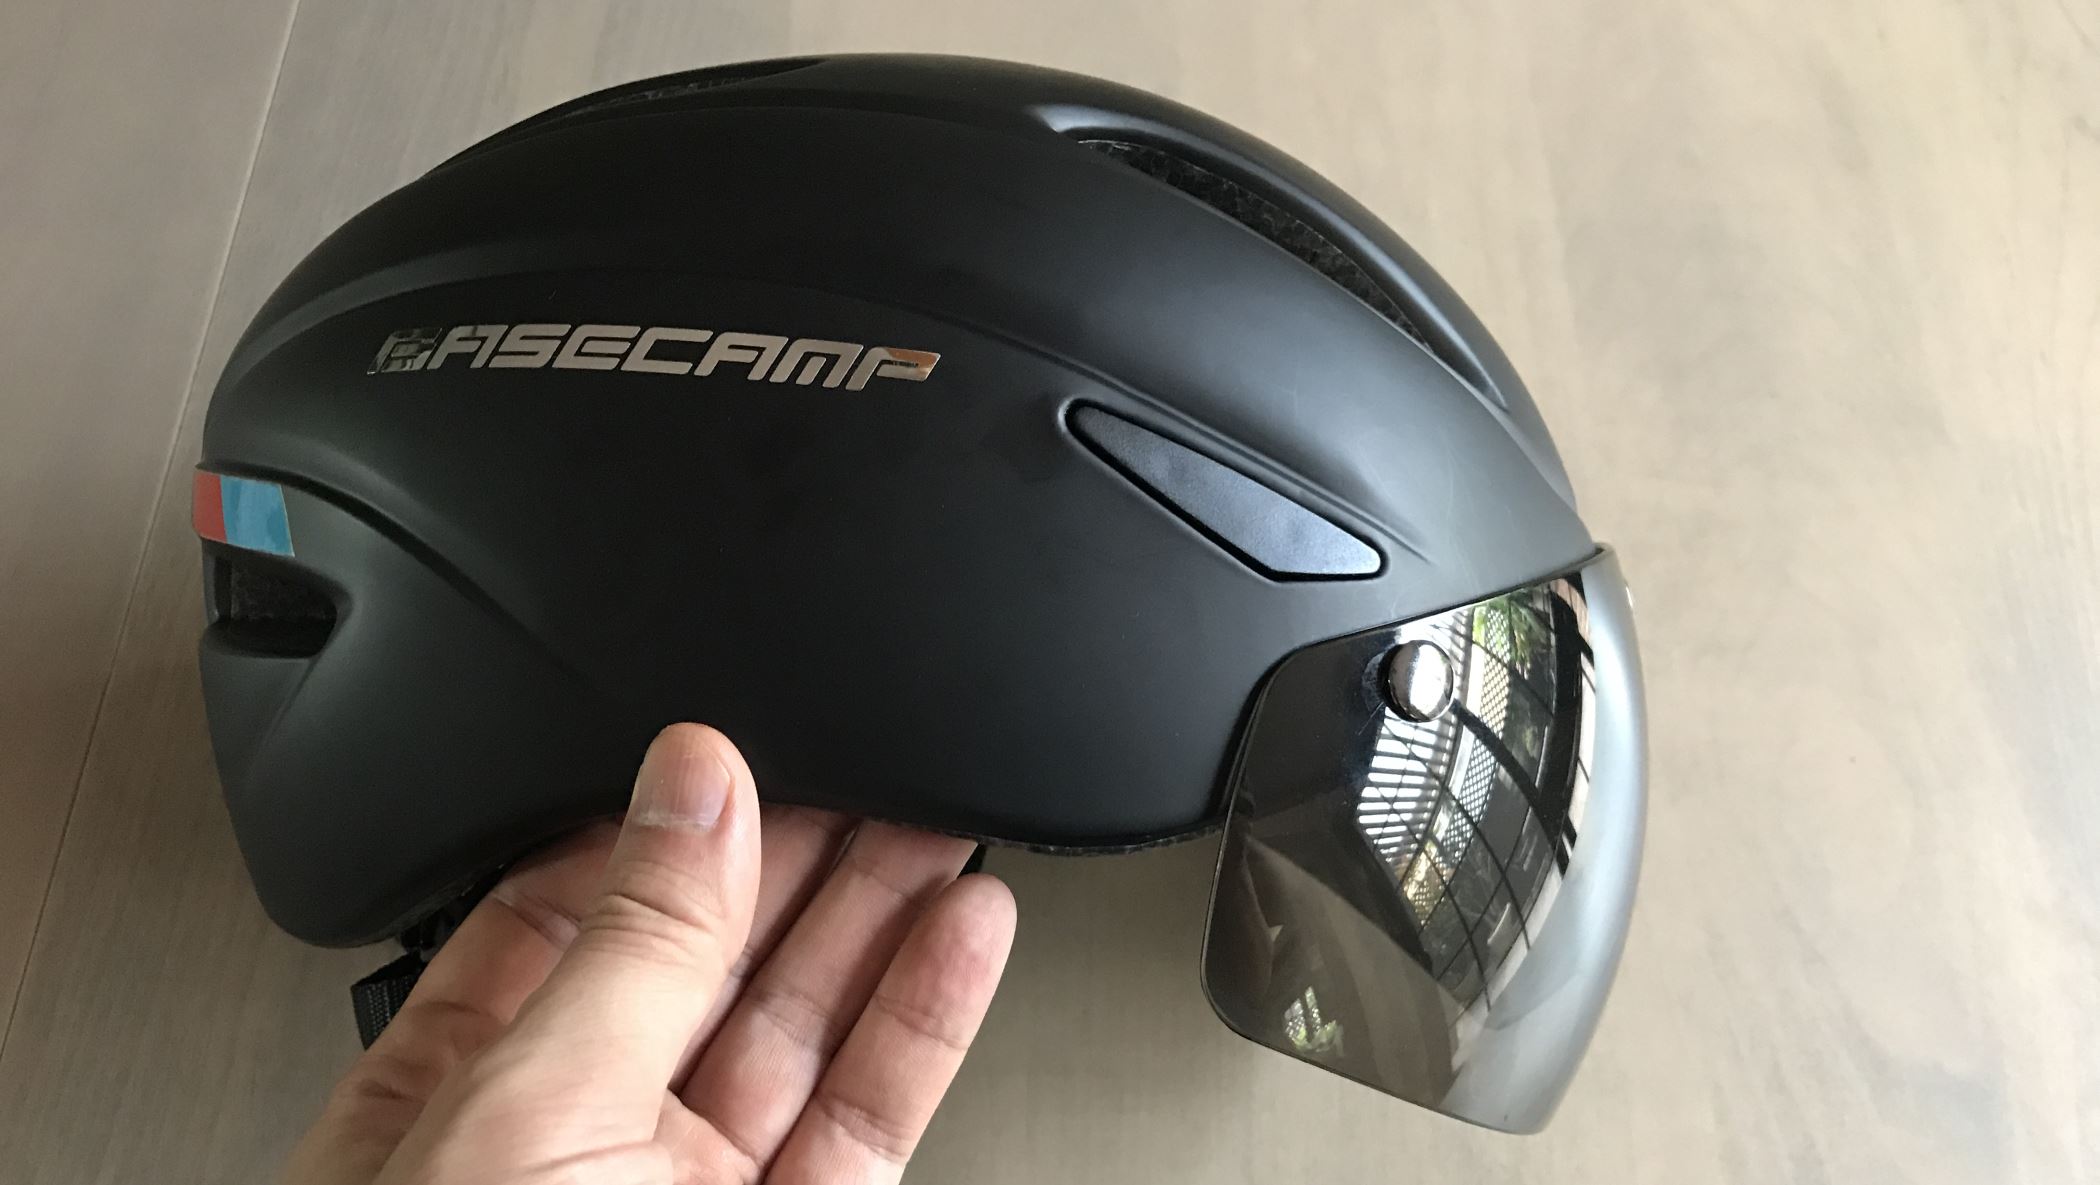 Base Camp Zoom Cycling Helmet with Removable Shield Visor